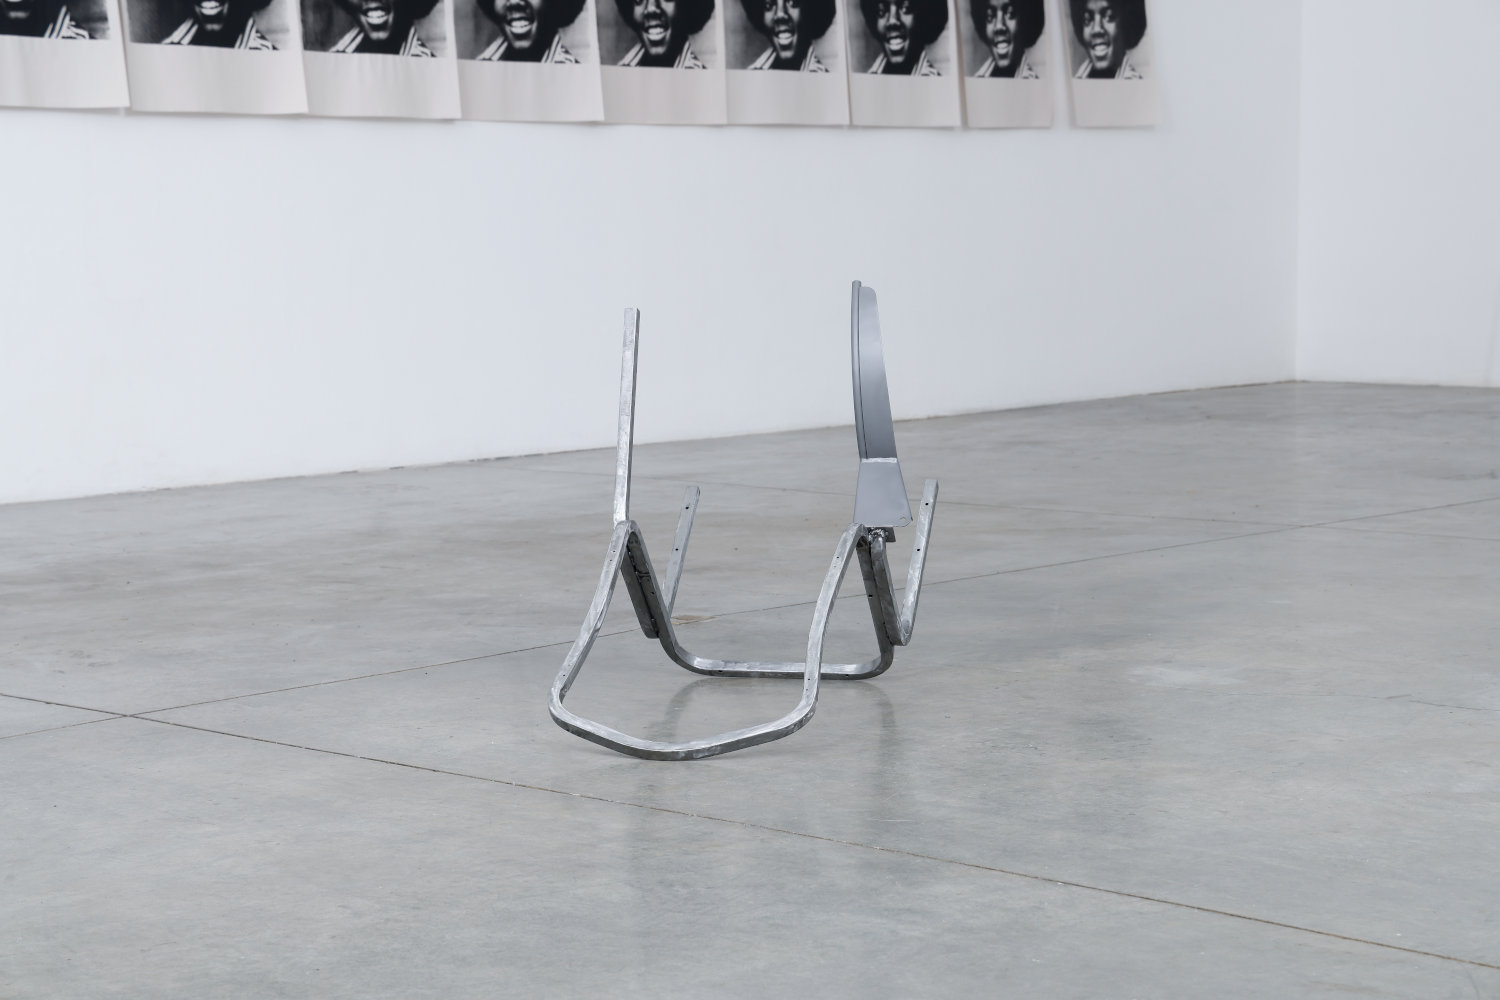 Joseph  Sherman artwork: Upside down broken chair with one  leg  replaced by part of a basketball hoop